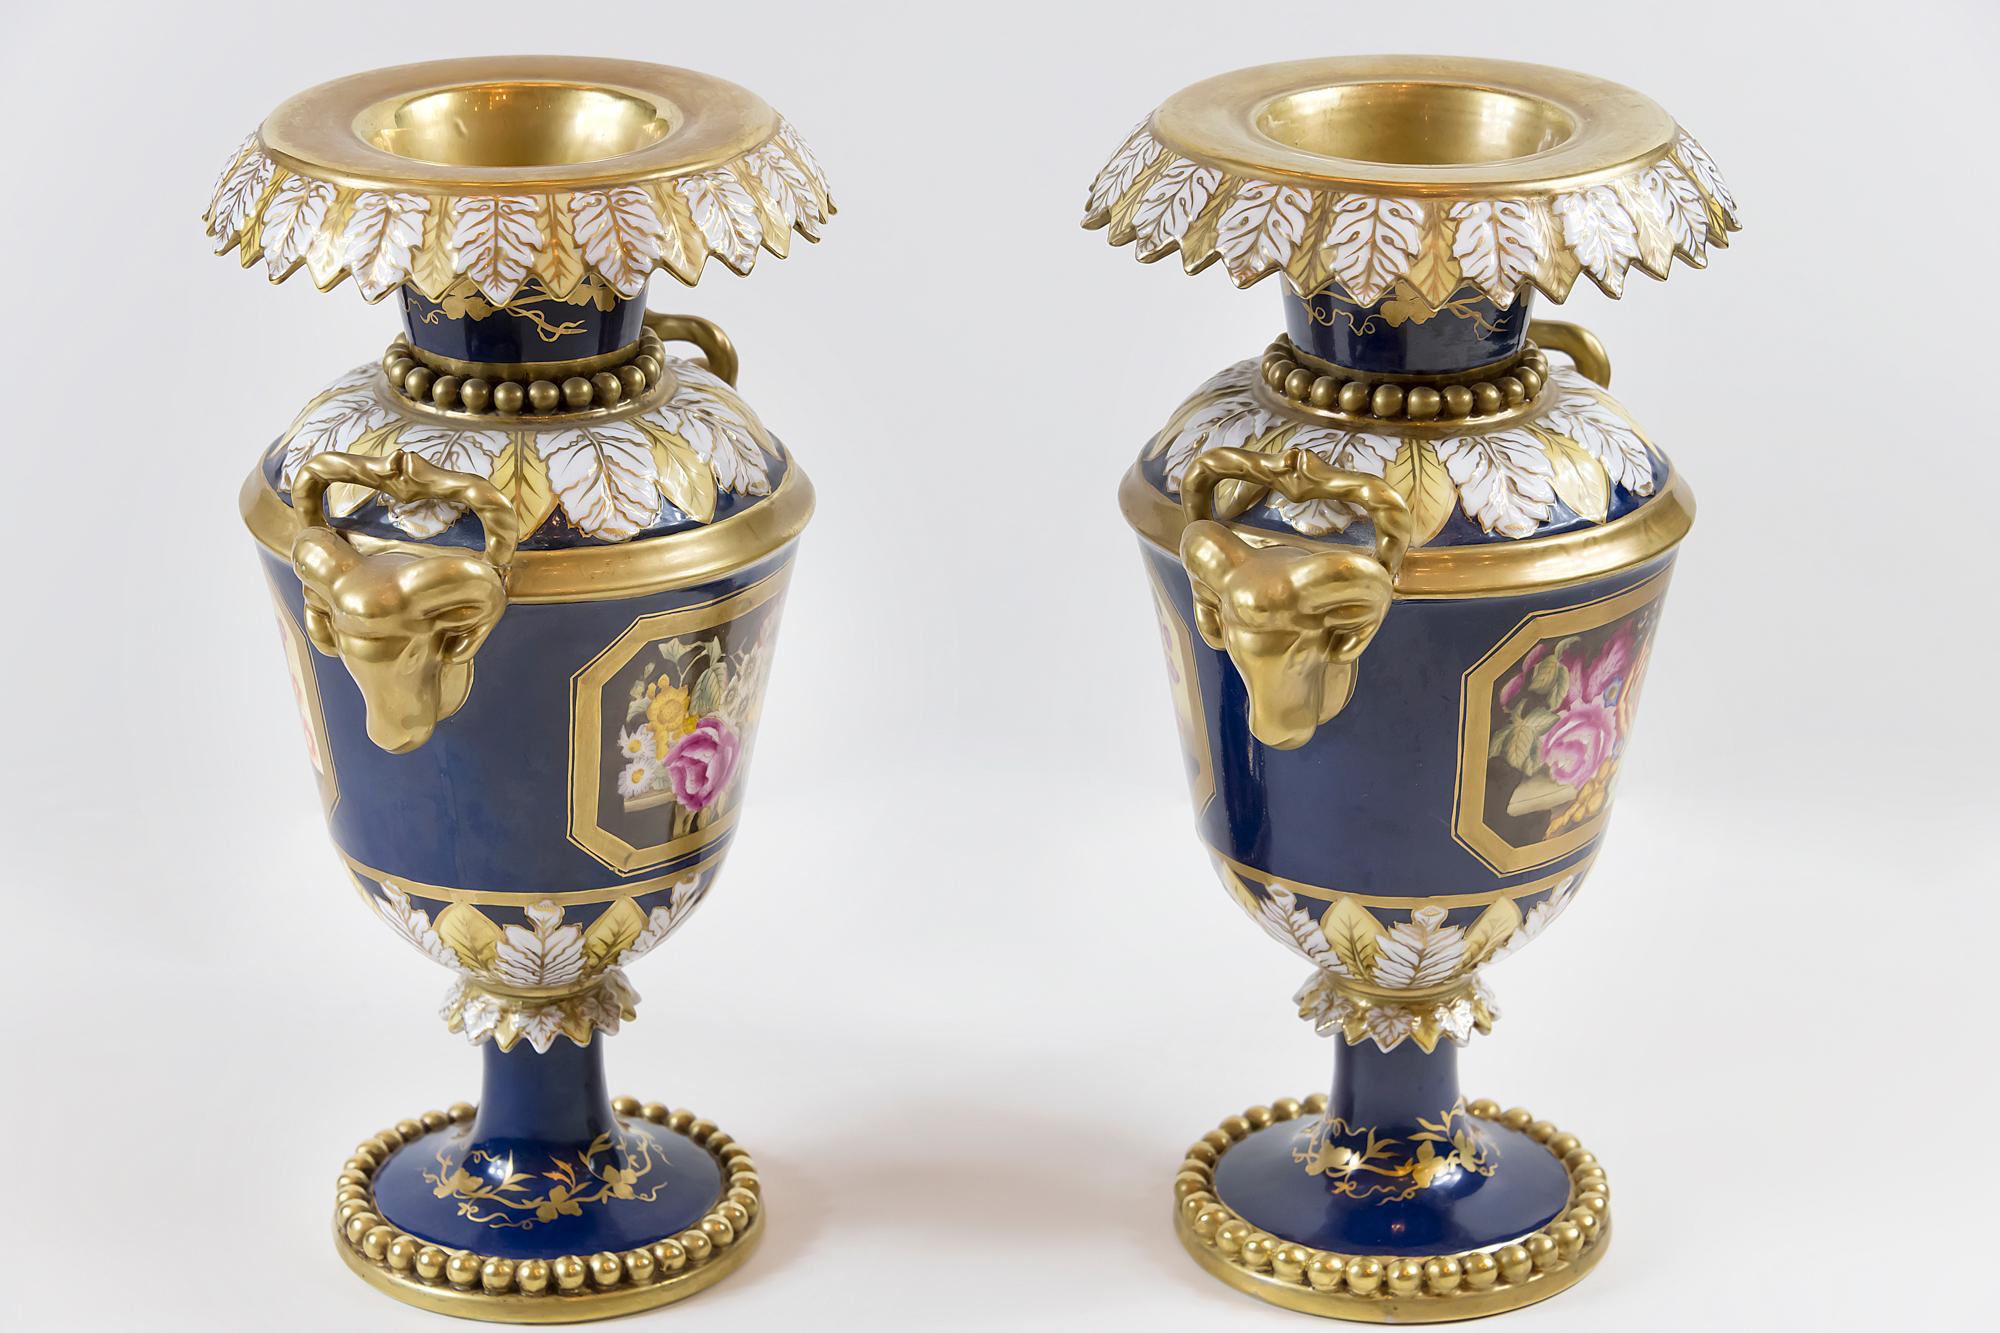 Pair of French Sèvres style cobalt blue porcelain vases decorated with hand painted decor.